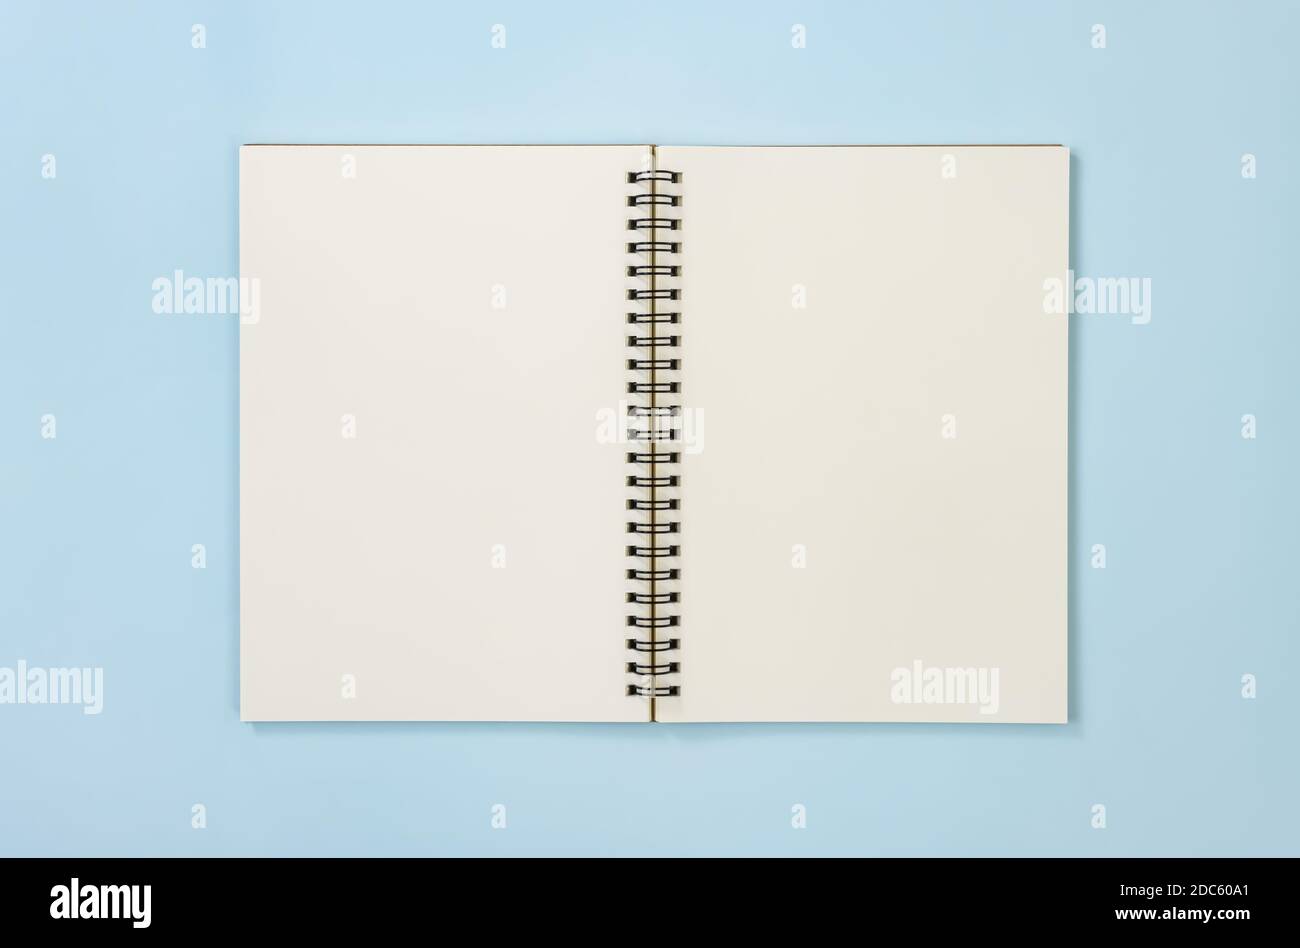 Top Table Spiral Notebook or Spring Notebook Mockup in Unlined Type on Center Frame on Blue Pastel Minimalist Background Stock Photo